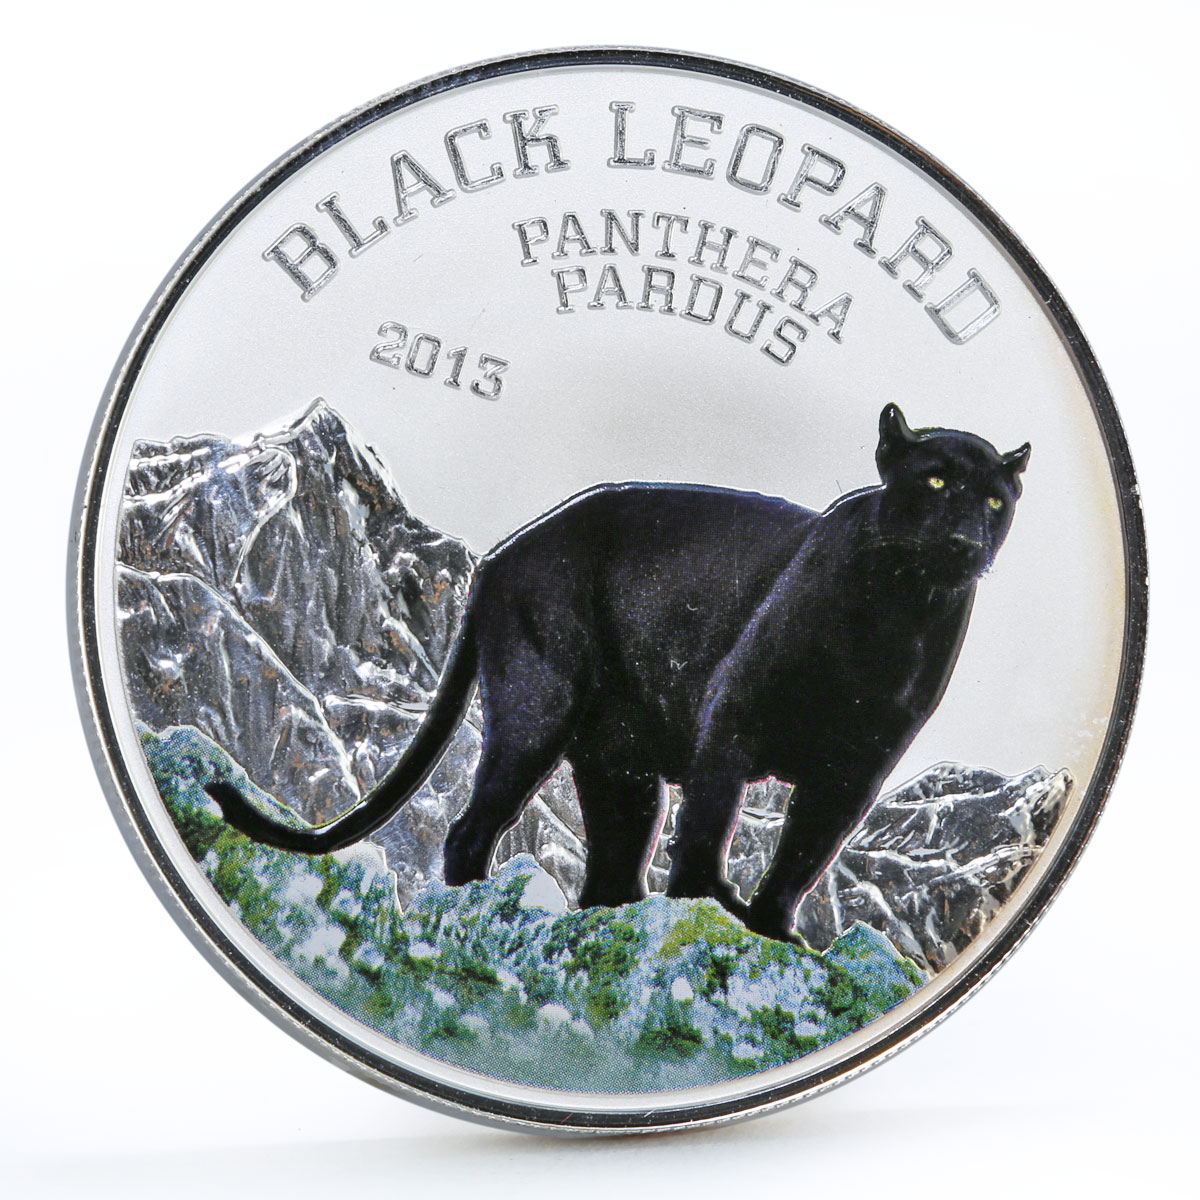 Congo 1000 francs Wildlife Black Leopard Cat colored silver coin 2013